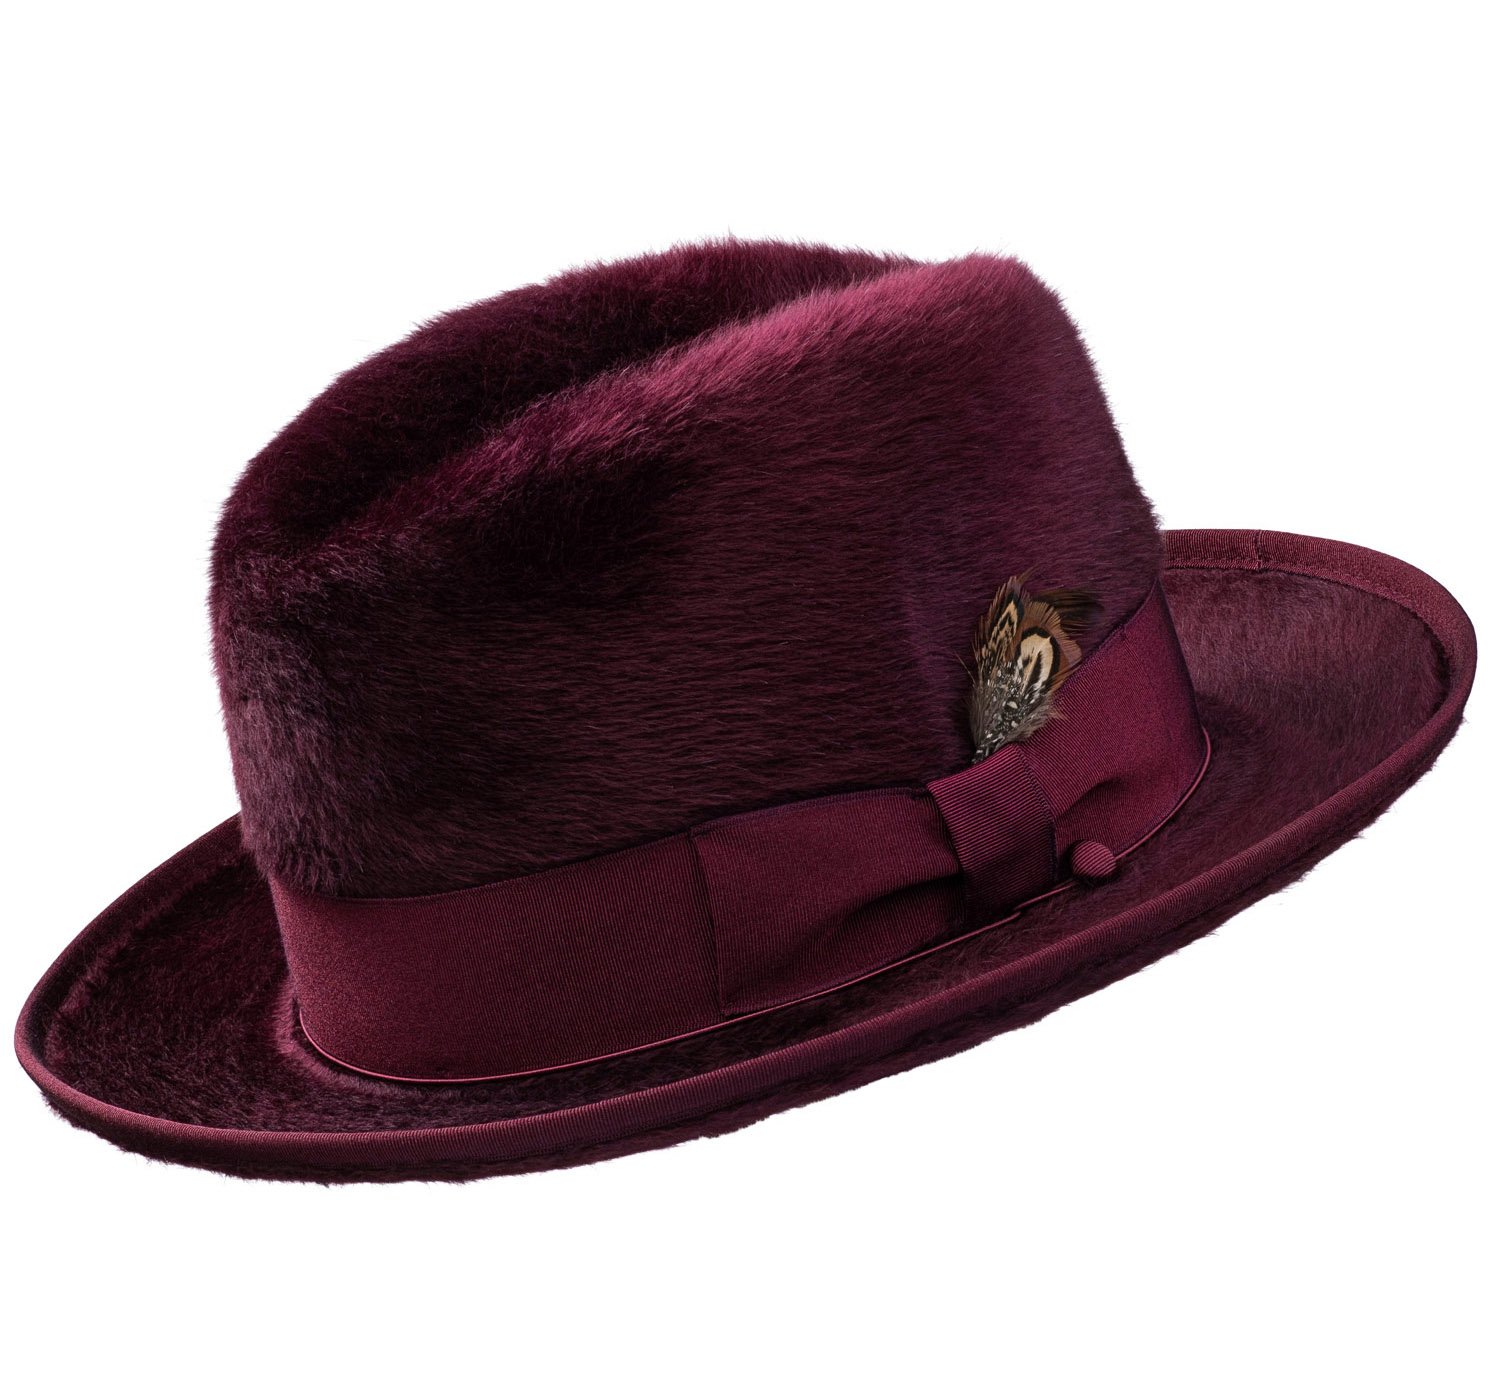 7 colors-Homburg Beaver Hat [Fast shipping and box packing]